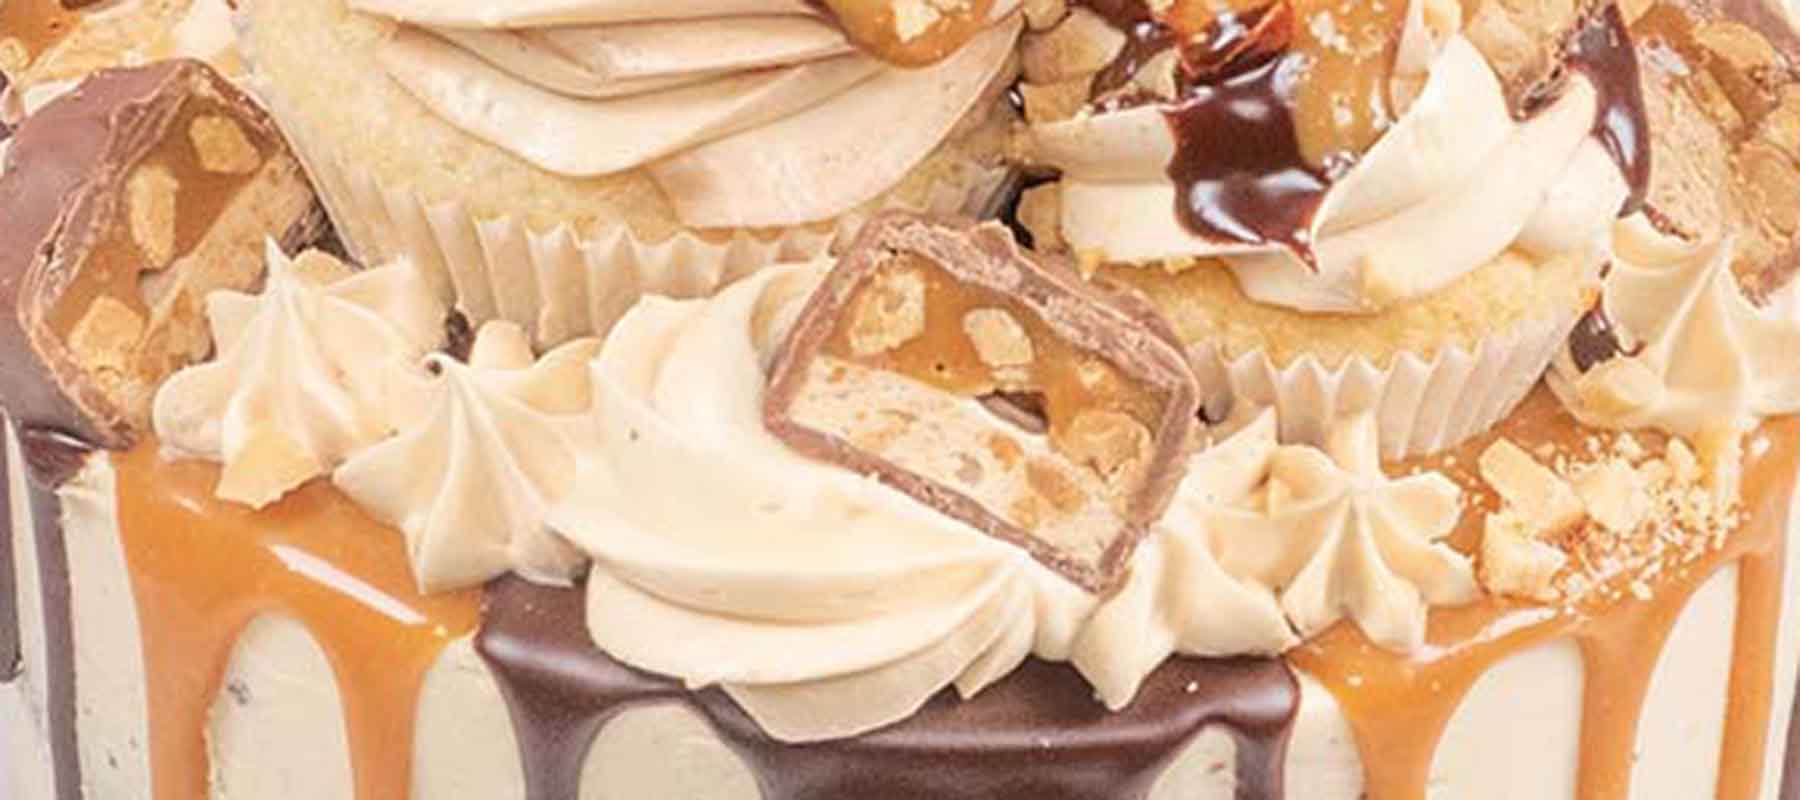 Peanut Butter Cakes to Buy by Anges de Sucre